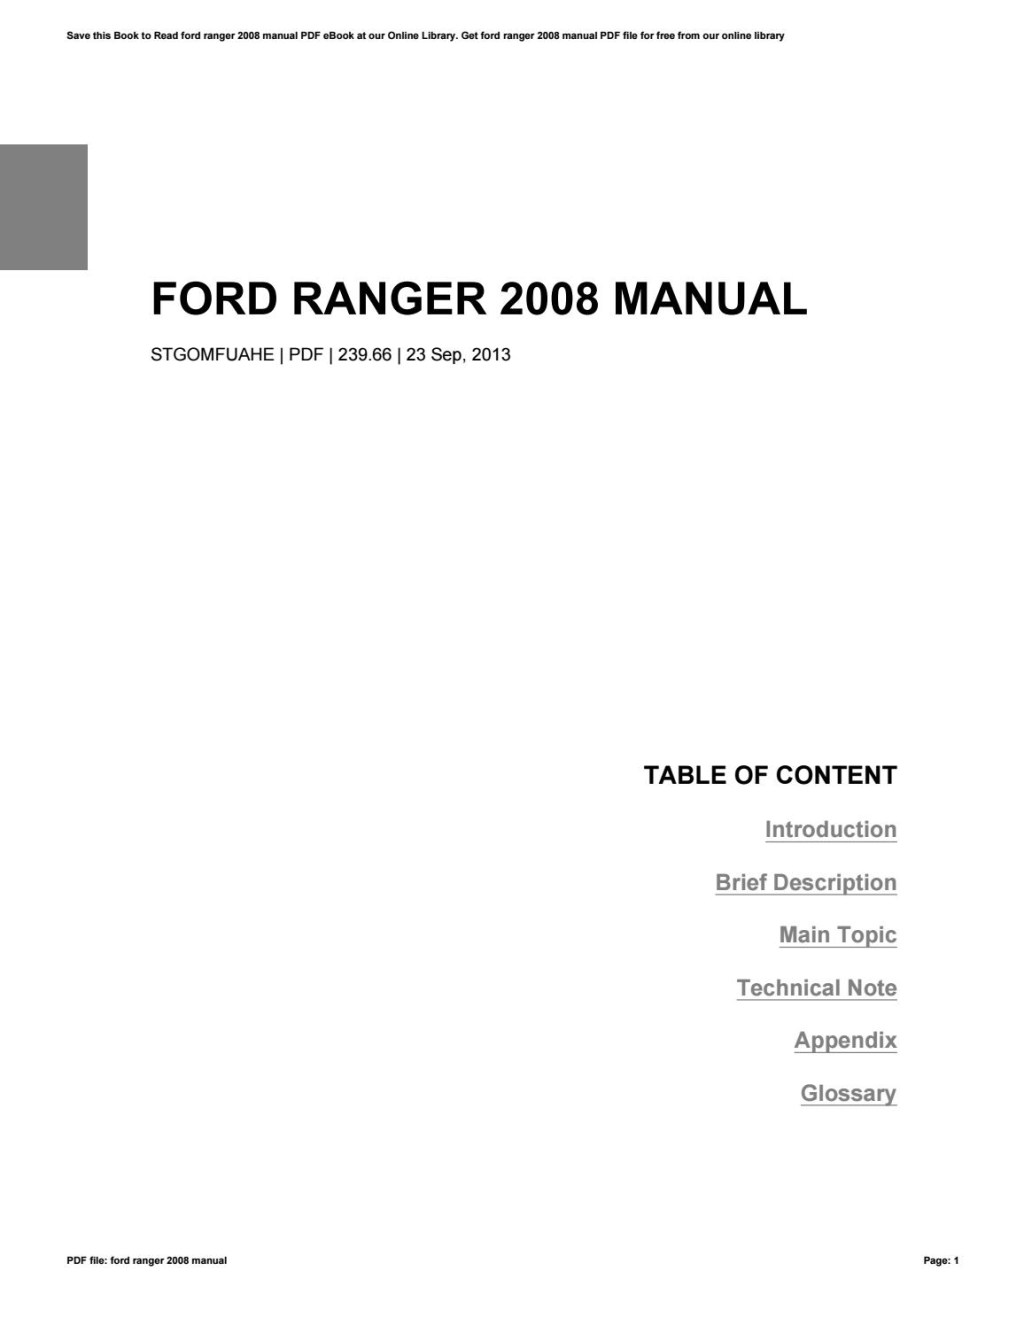 Picture of: Ford ranger  manual by AnthonyStubbs – Issuu